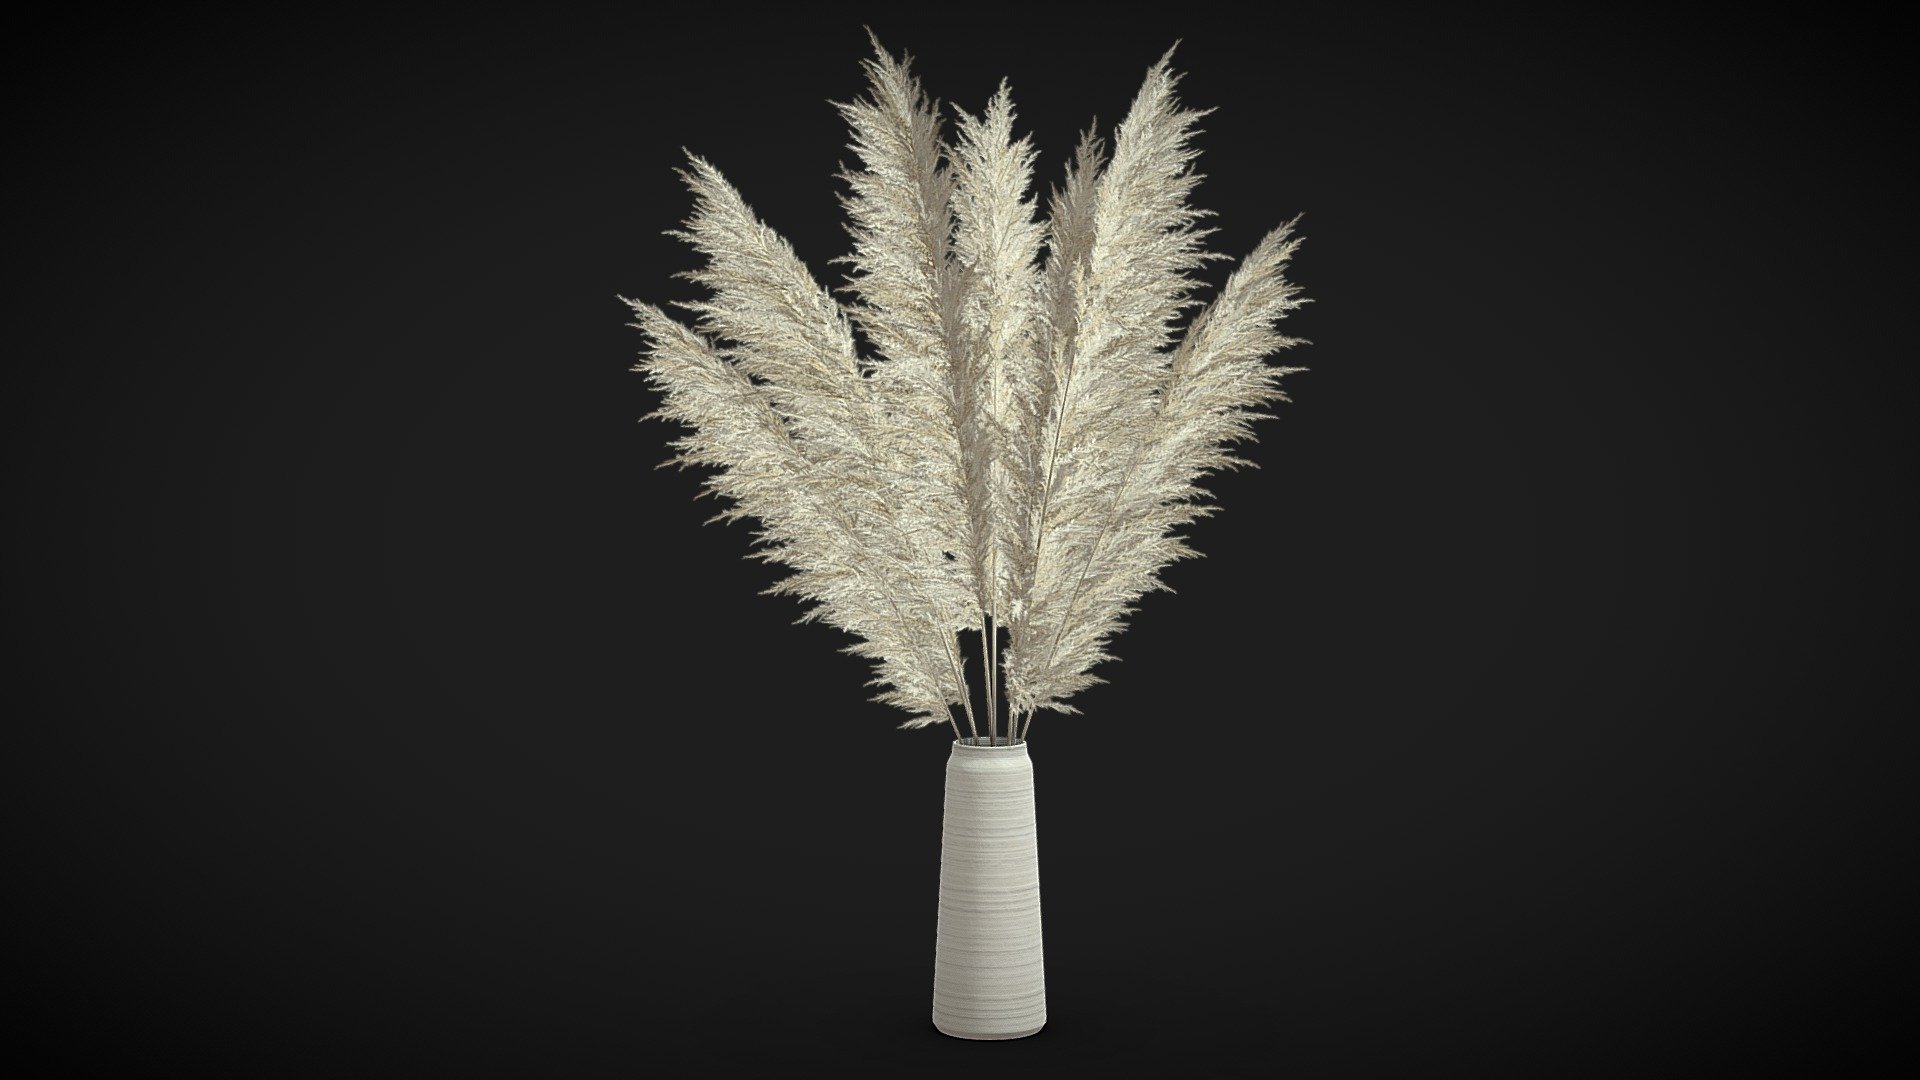 Pampas grass in a tall white clay vase.

Specification:




Model is in a real scale

Height: 103cm

Polygons: 70188

Verticles: 260459

Only Quads and Triangles used

Formats:




3ds max 2017 V-Ray (native)

3ds max 2017 Arnold

Cinema R20

Cinema R20 V-Ray

Blender Cycles

Unity 2020

Unreal Engine 5.1

FBX

OBJ

DWG
 - Pampas Grass II - Buy Royalty Free 3D model by Fusemesh 3d model